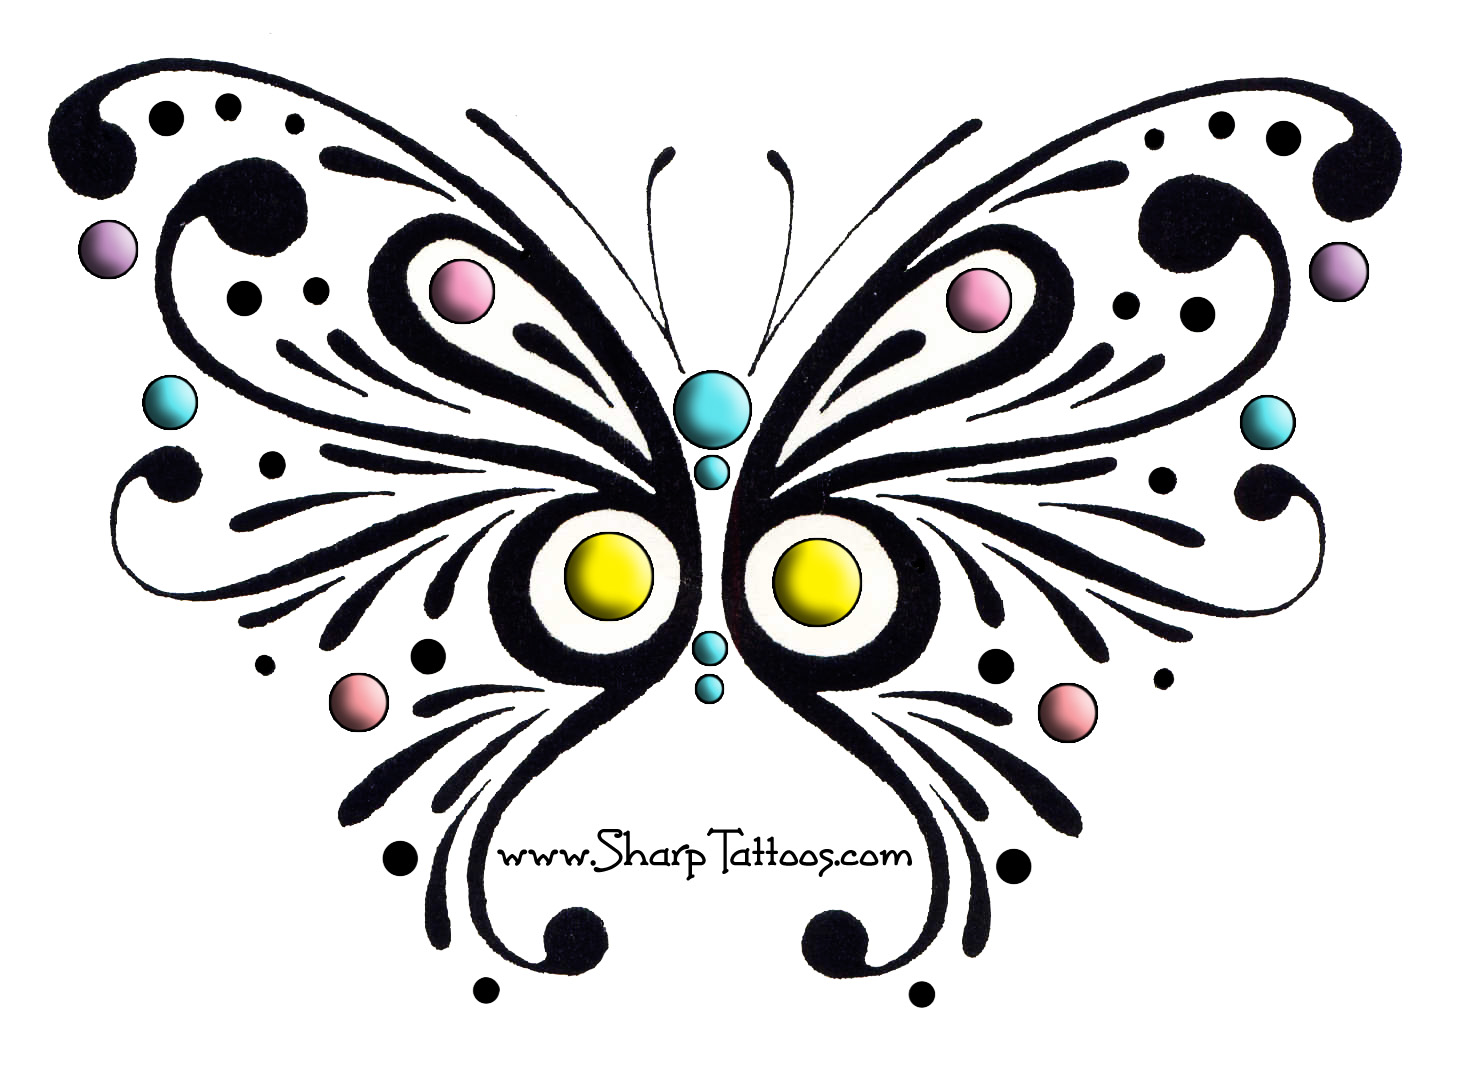 Tribal Butterfly by Taesa on Clipart library